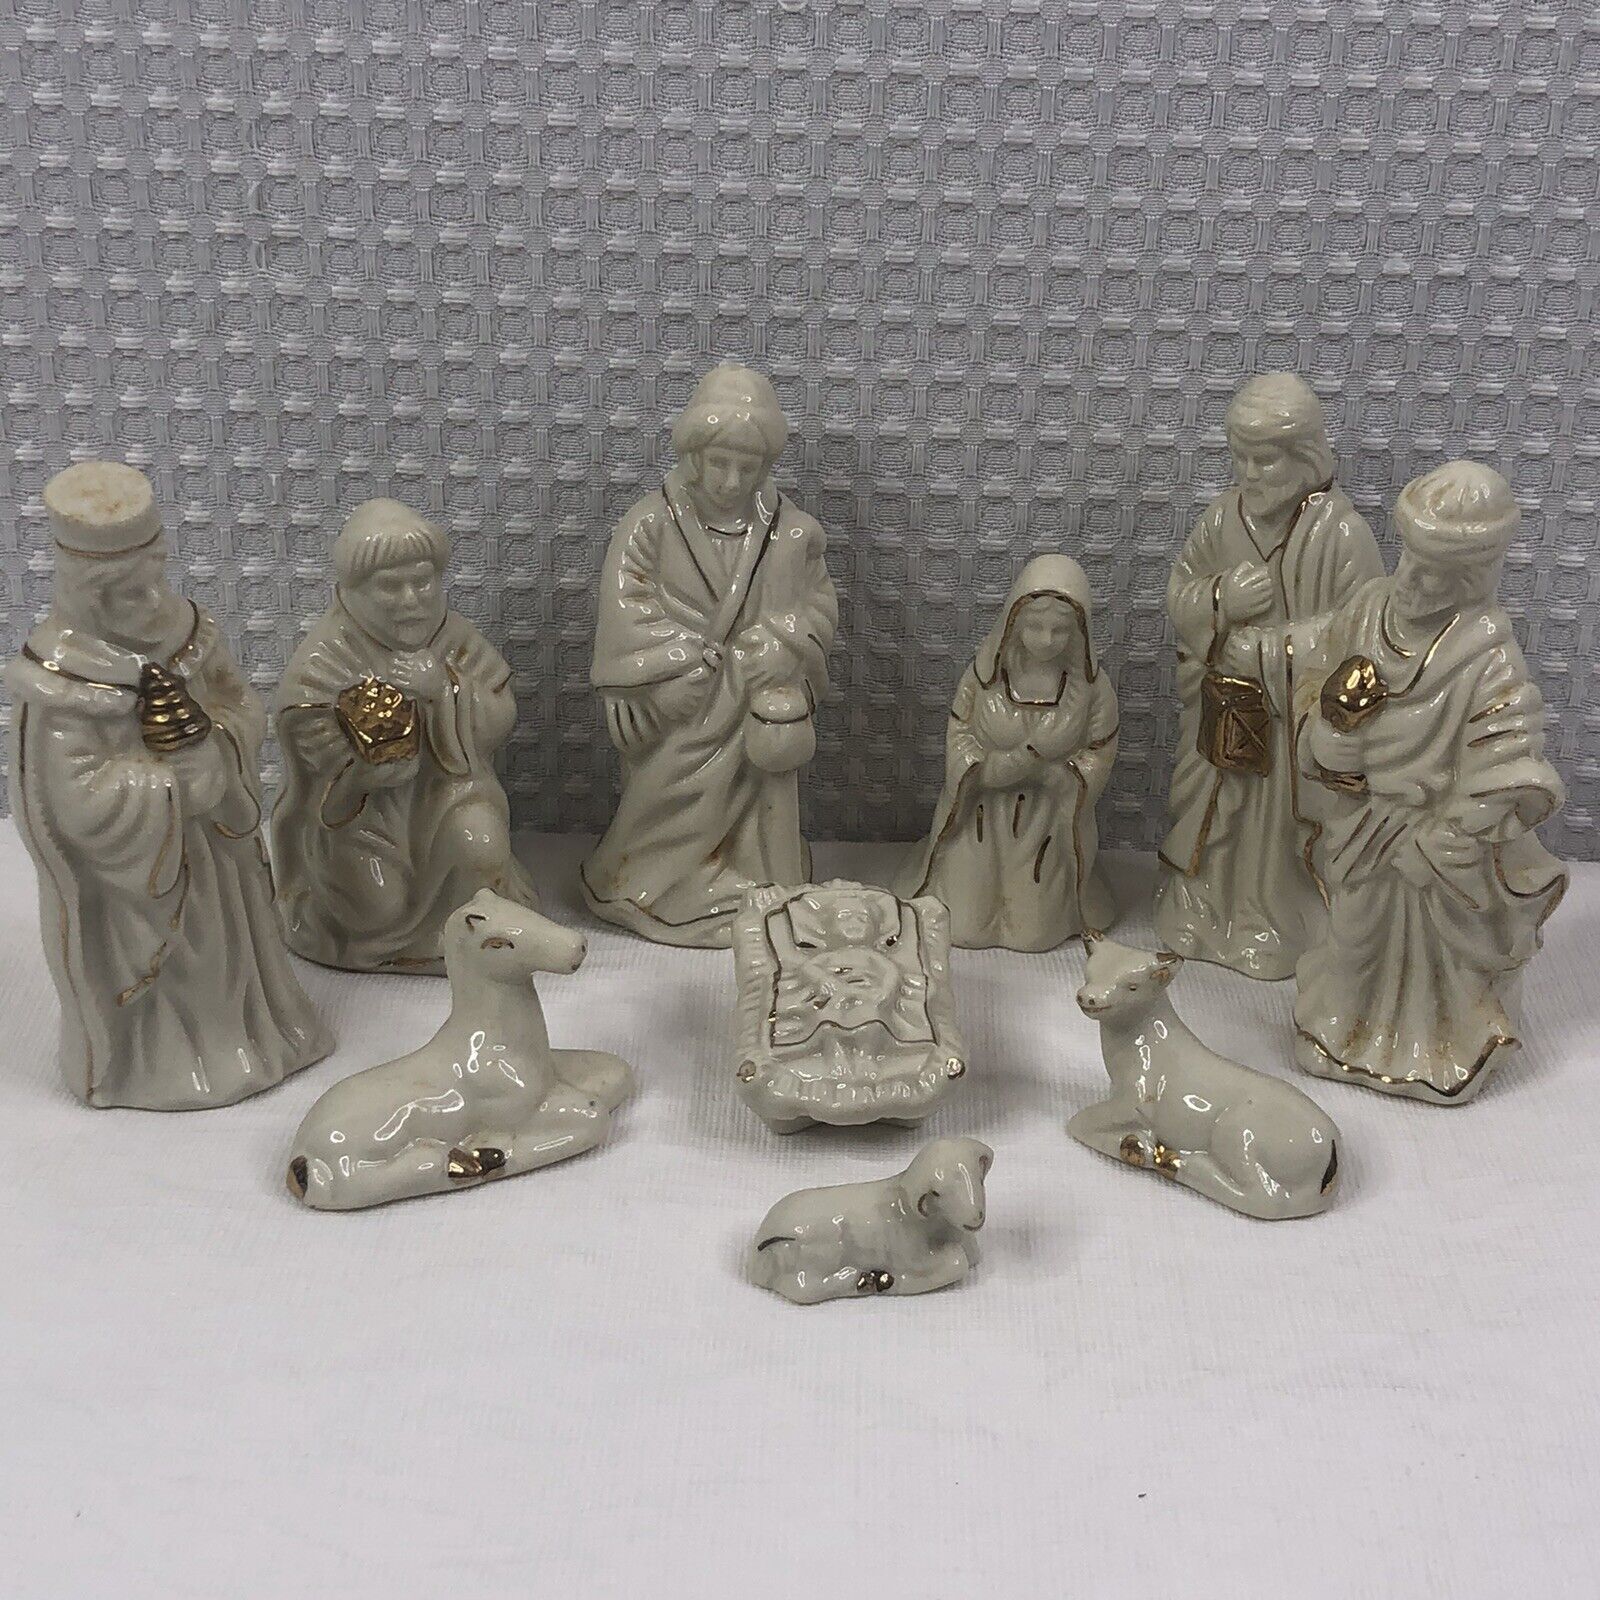 Vintage Porcelain Nativity Set Cream with Gold Trim **FLAWS** SEE PICTURES**